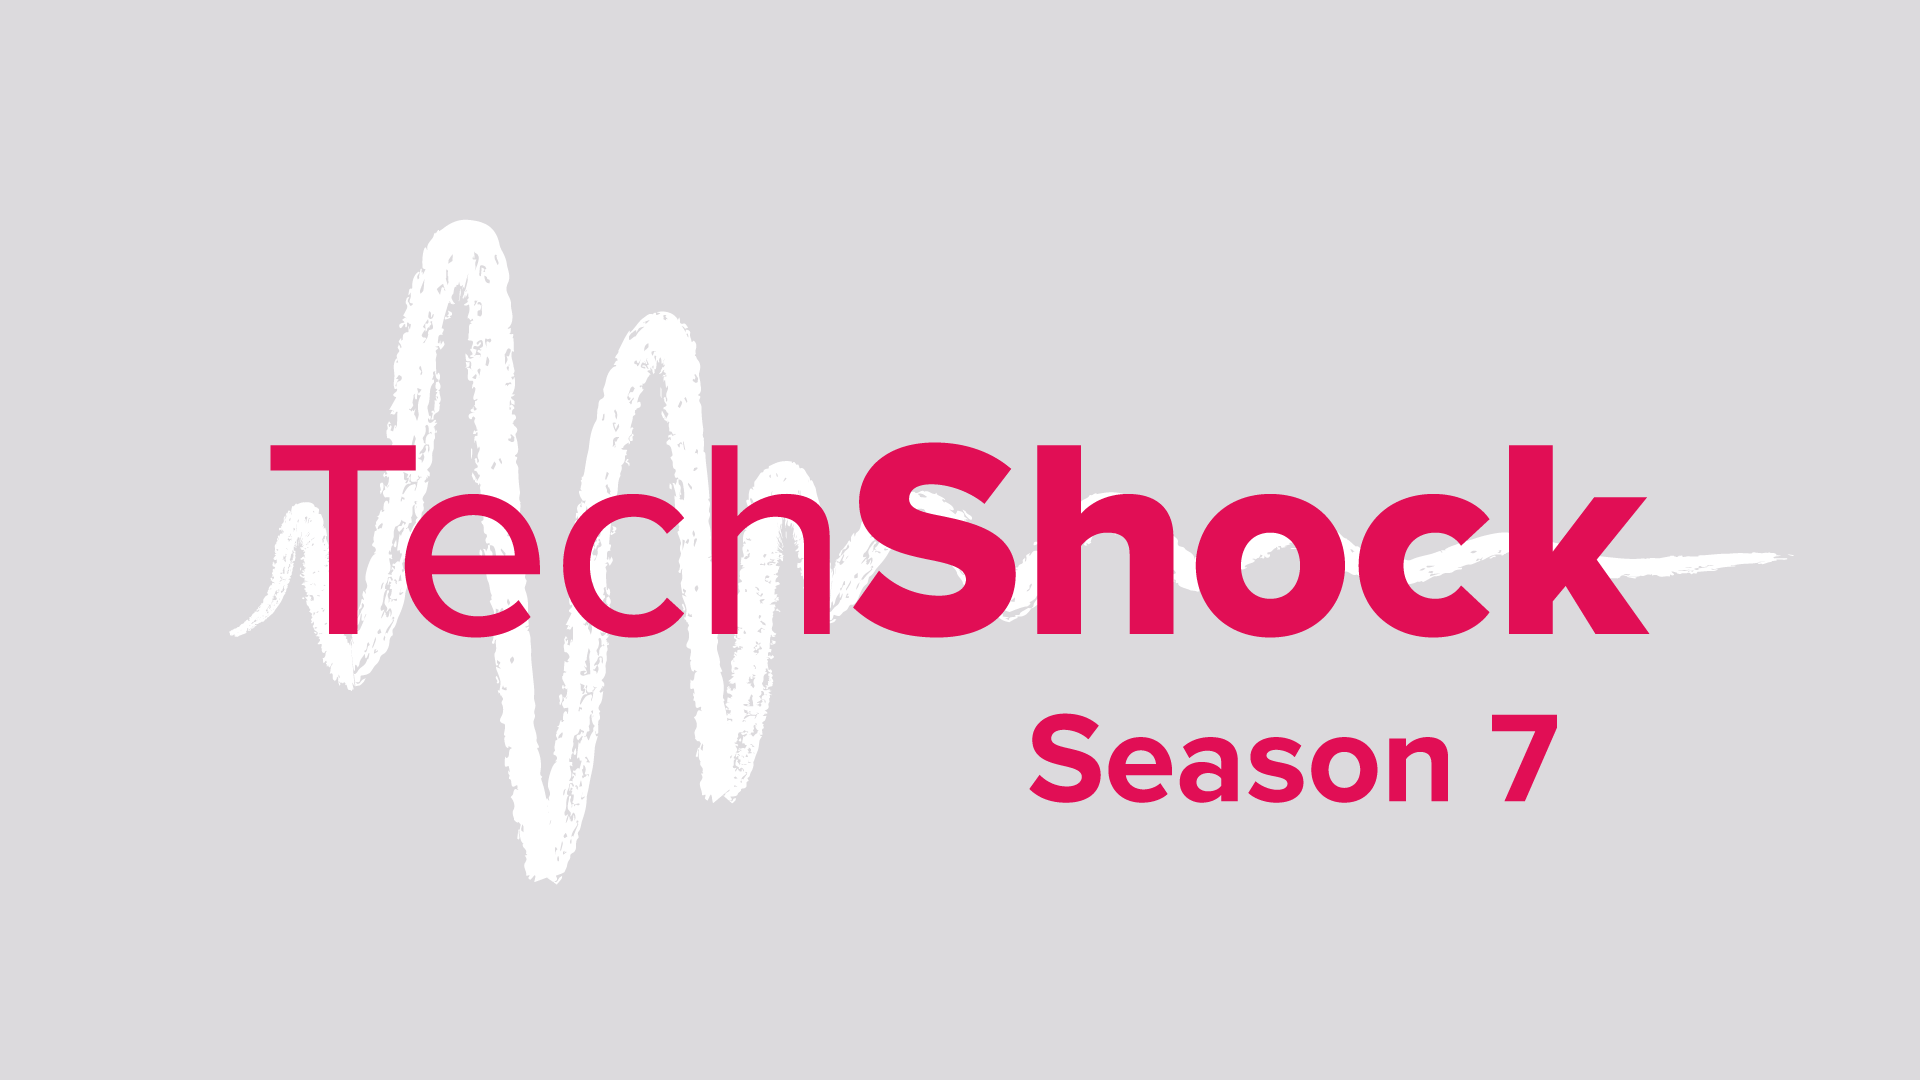 The Tech Shock podcast – the respectable face of the porn industry?